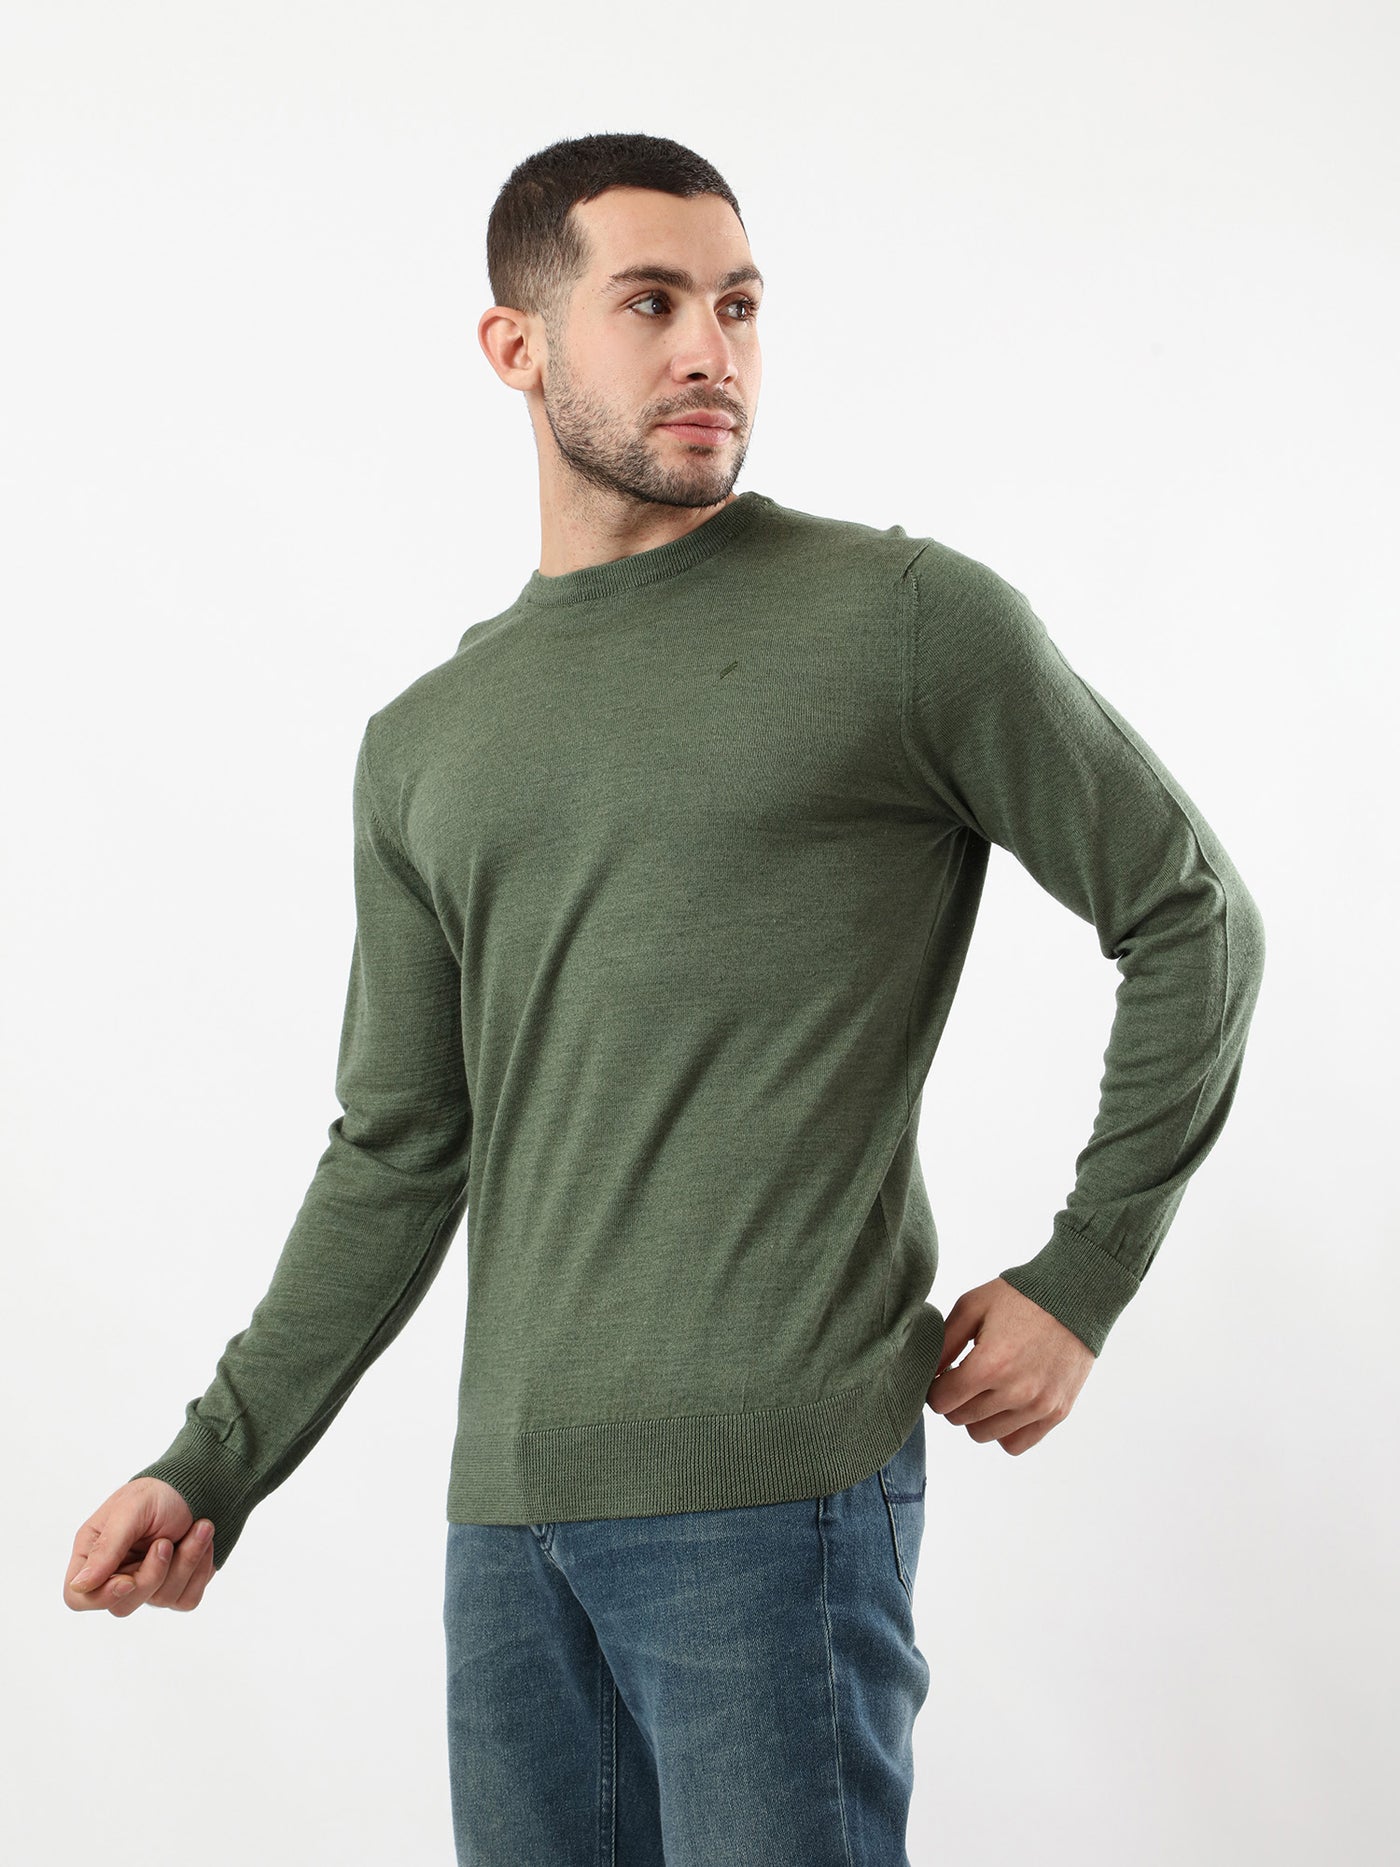 Sweater - Long Sleeves - Round Neck